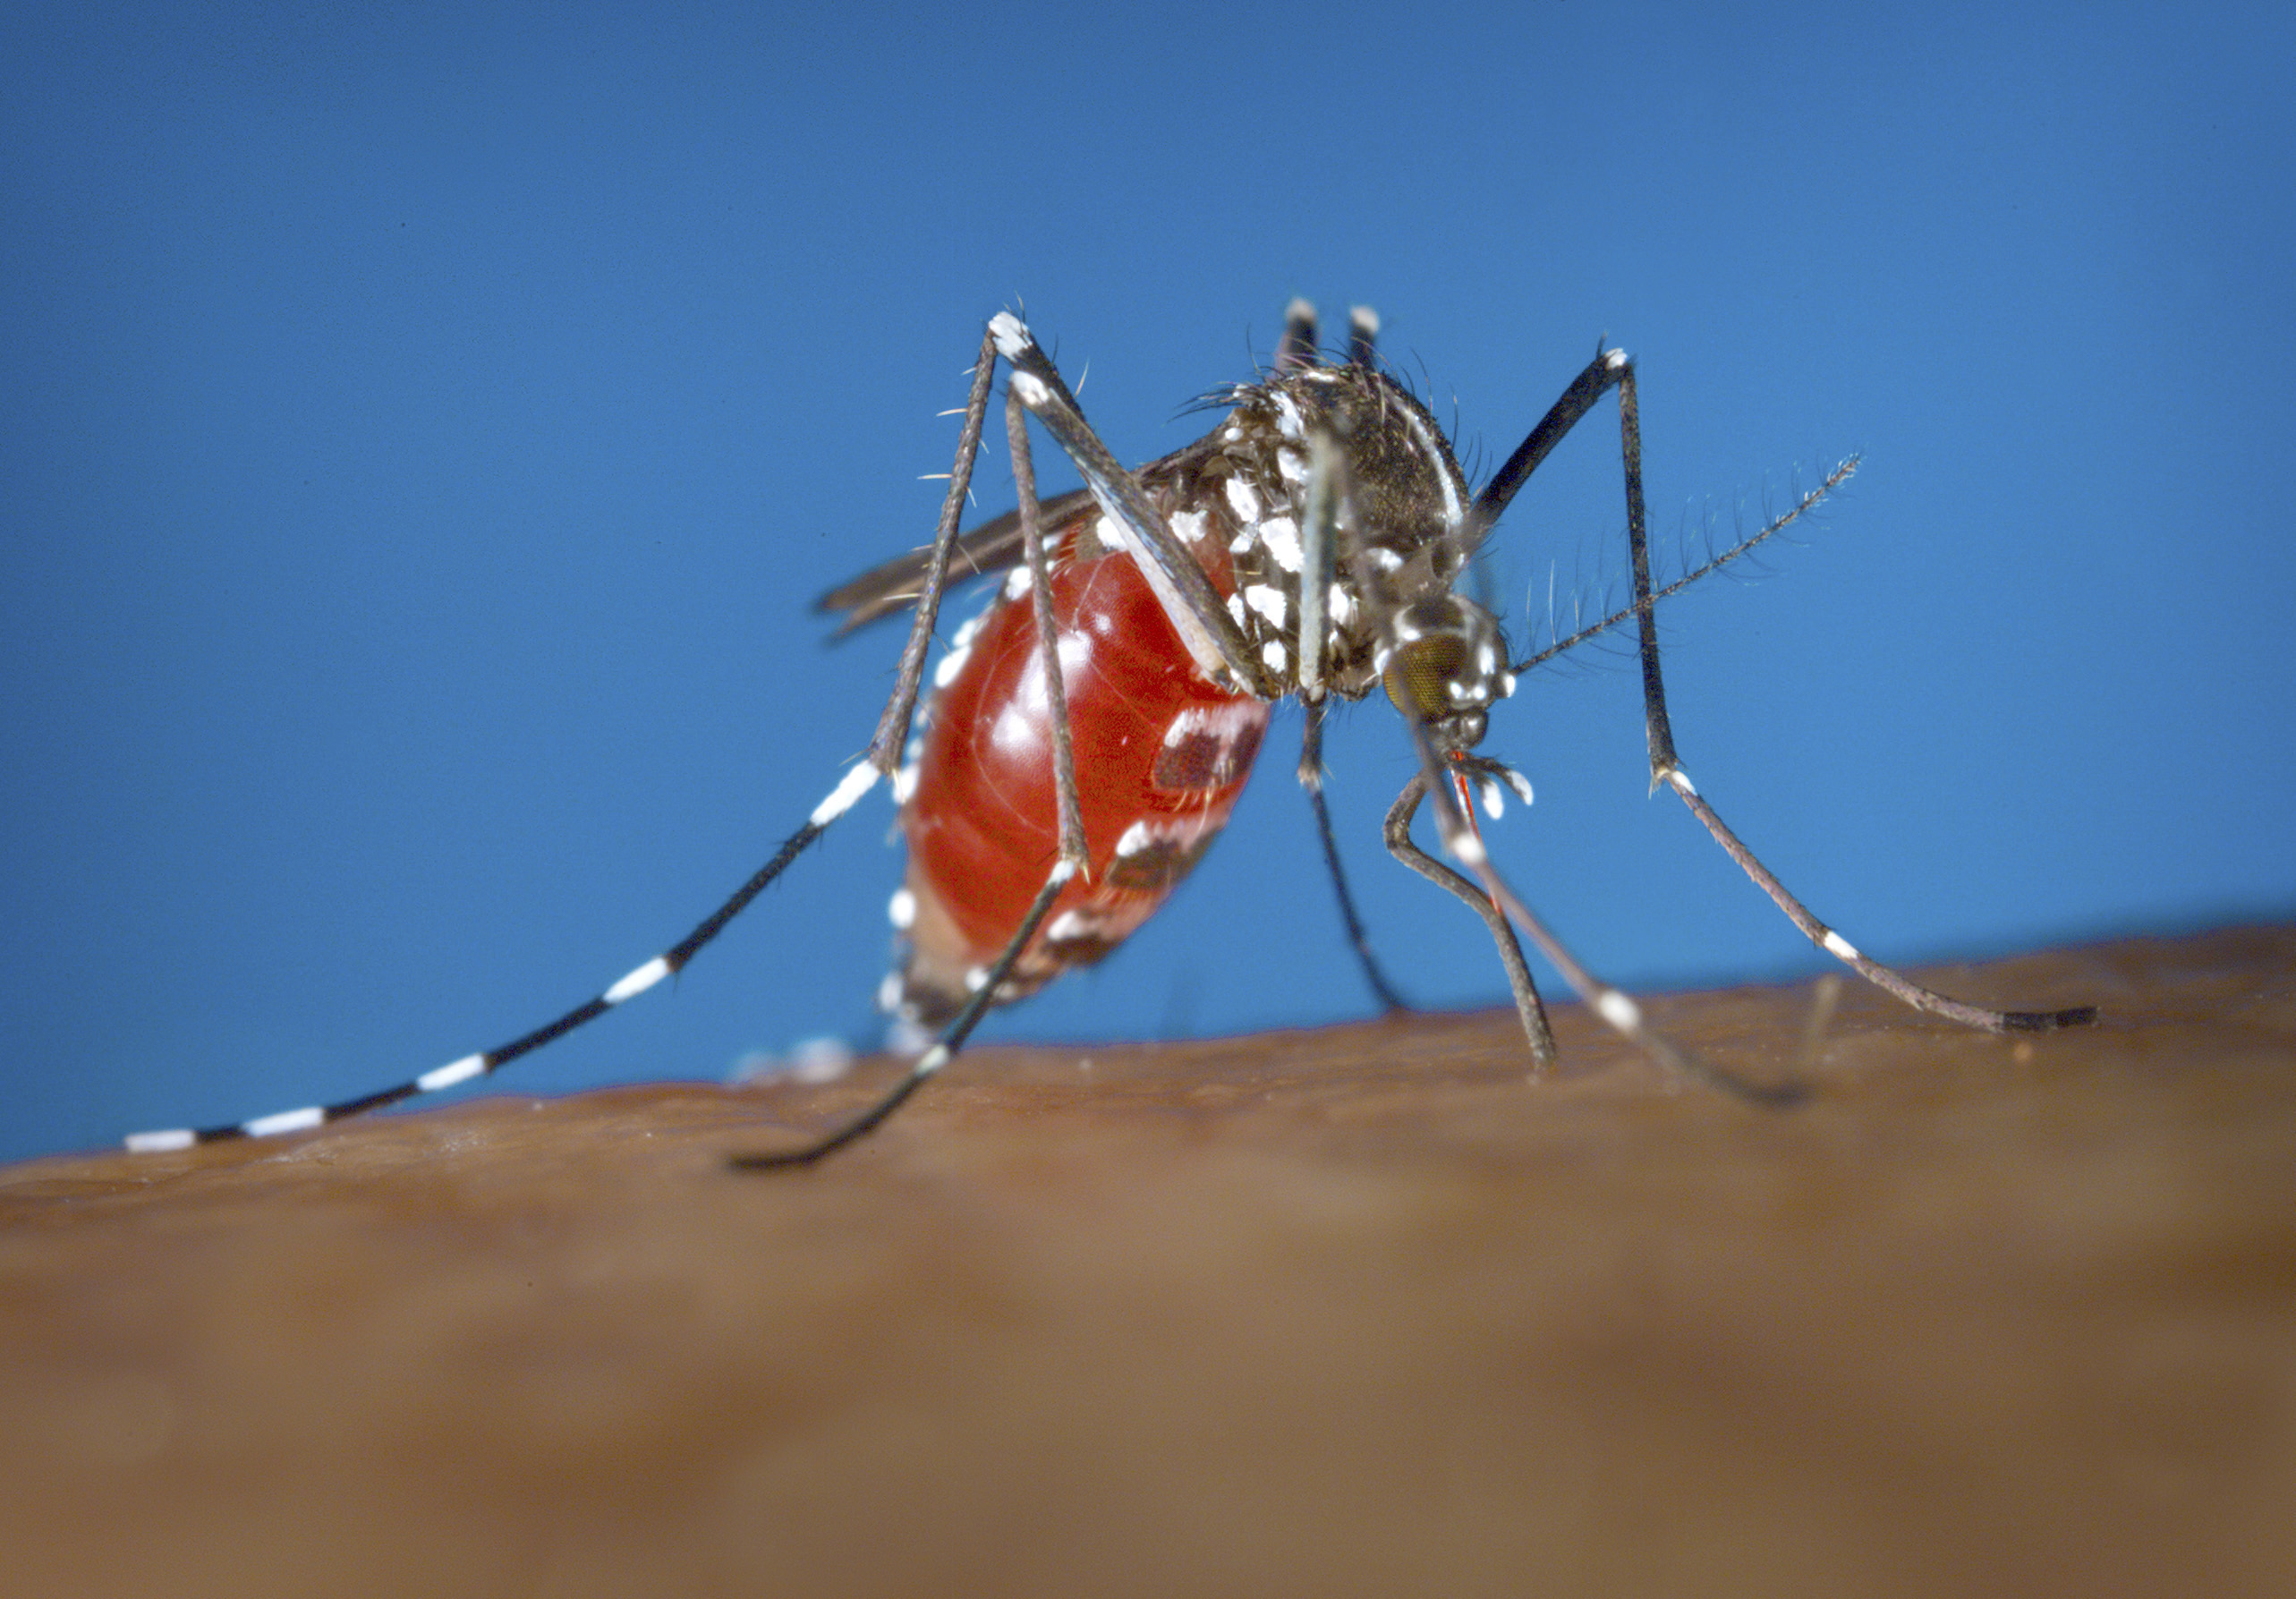 This 2003 photo provided by the Centers for Disease Control and Prevention shows a female Aedes albopictus mosquito acquiring a blood meal from a human host. (James Gathany/Centers for Disease Control and Prevention)